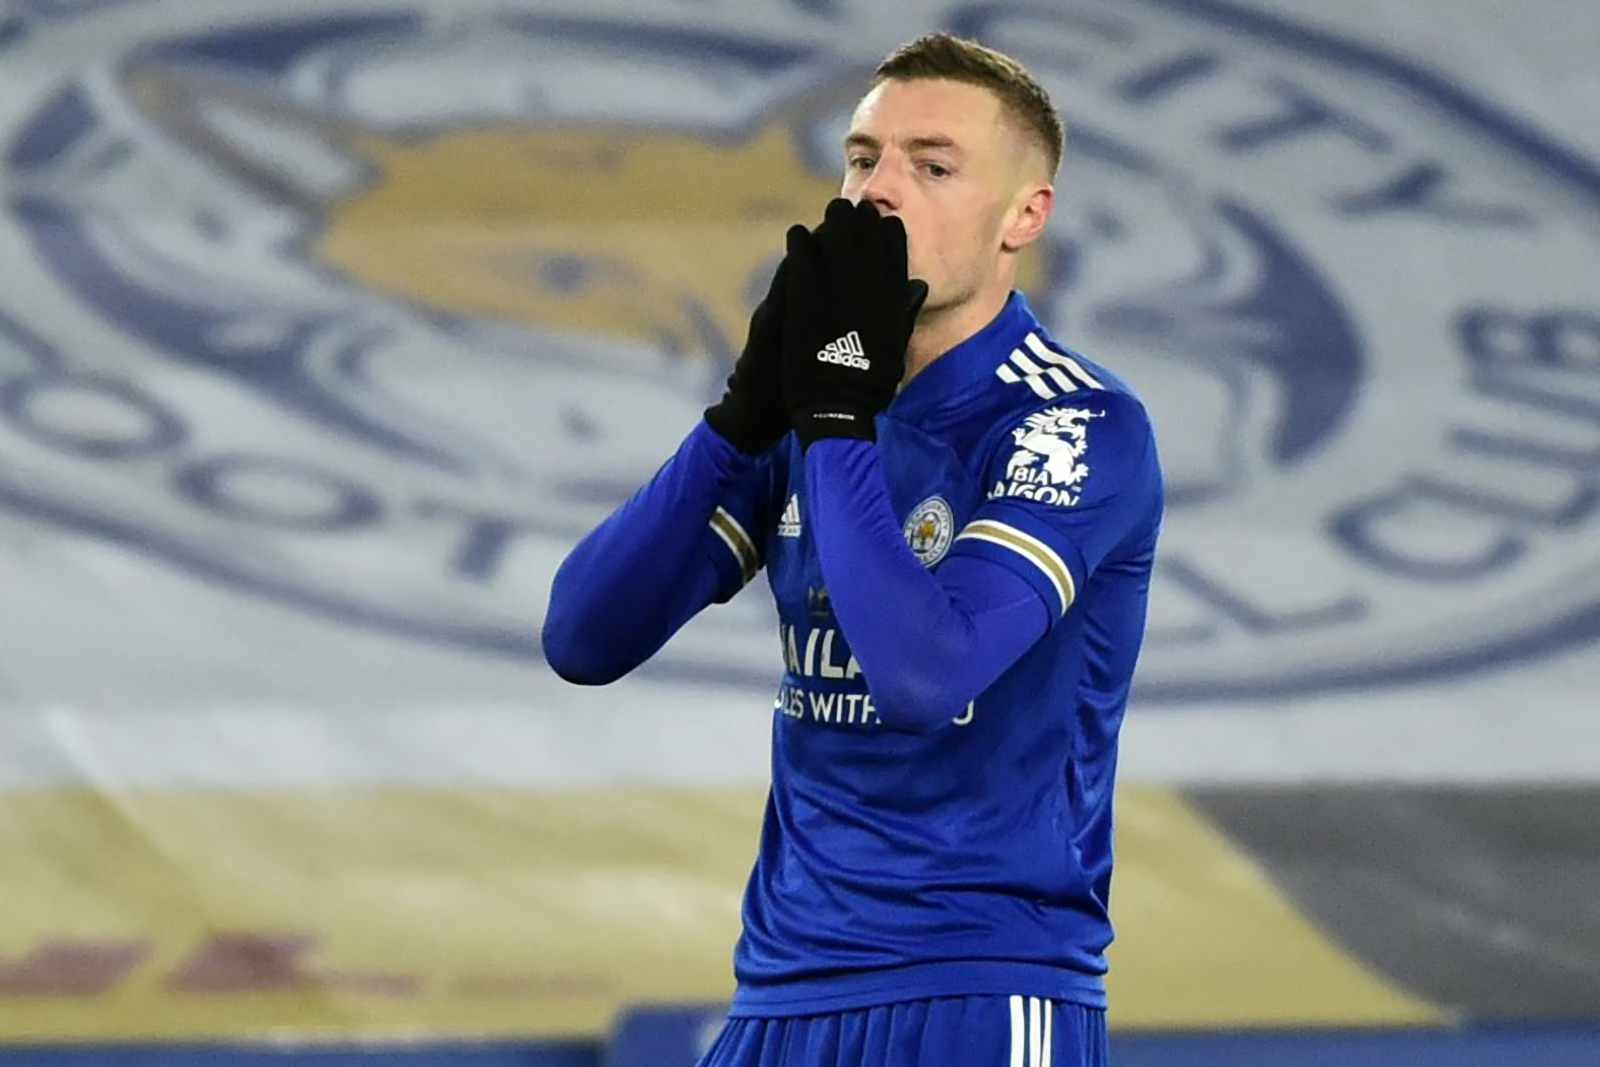 Leicester City injury update: will Jamie Vardy play against Chelsea?